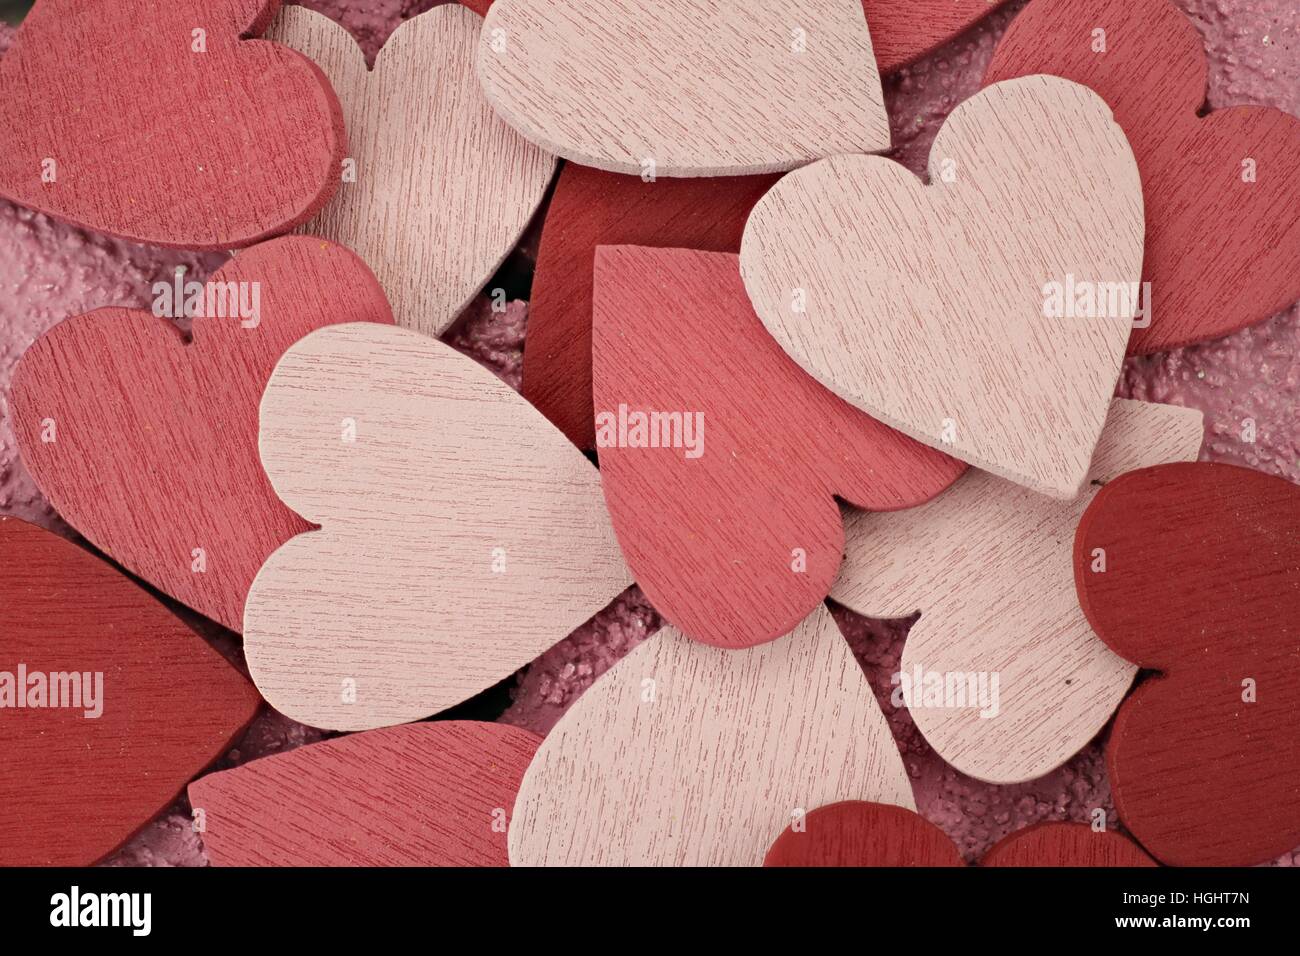 Background consisting of many hearts of wood Stock Photo